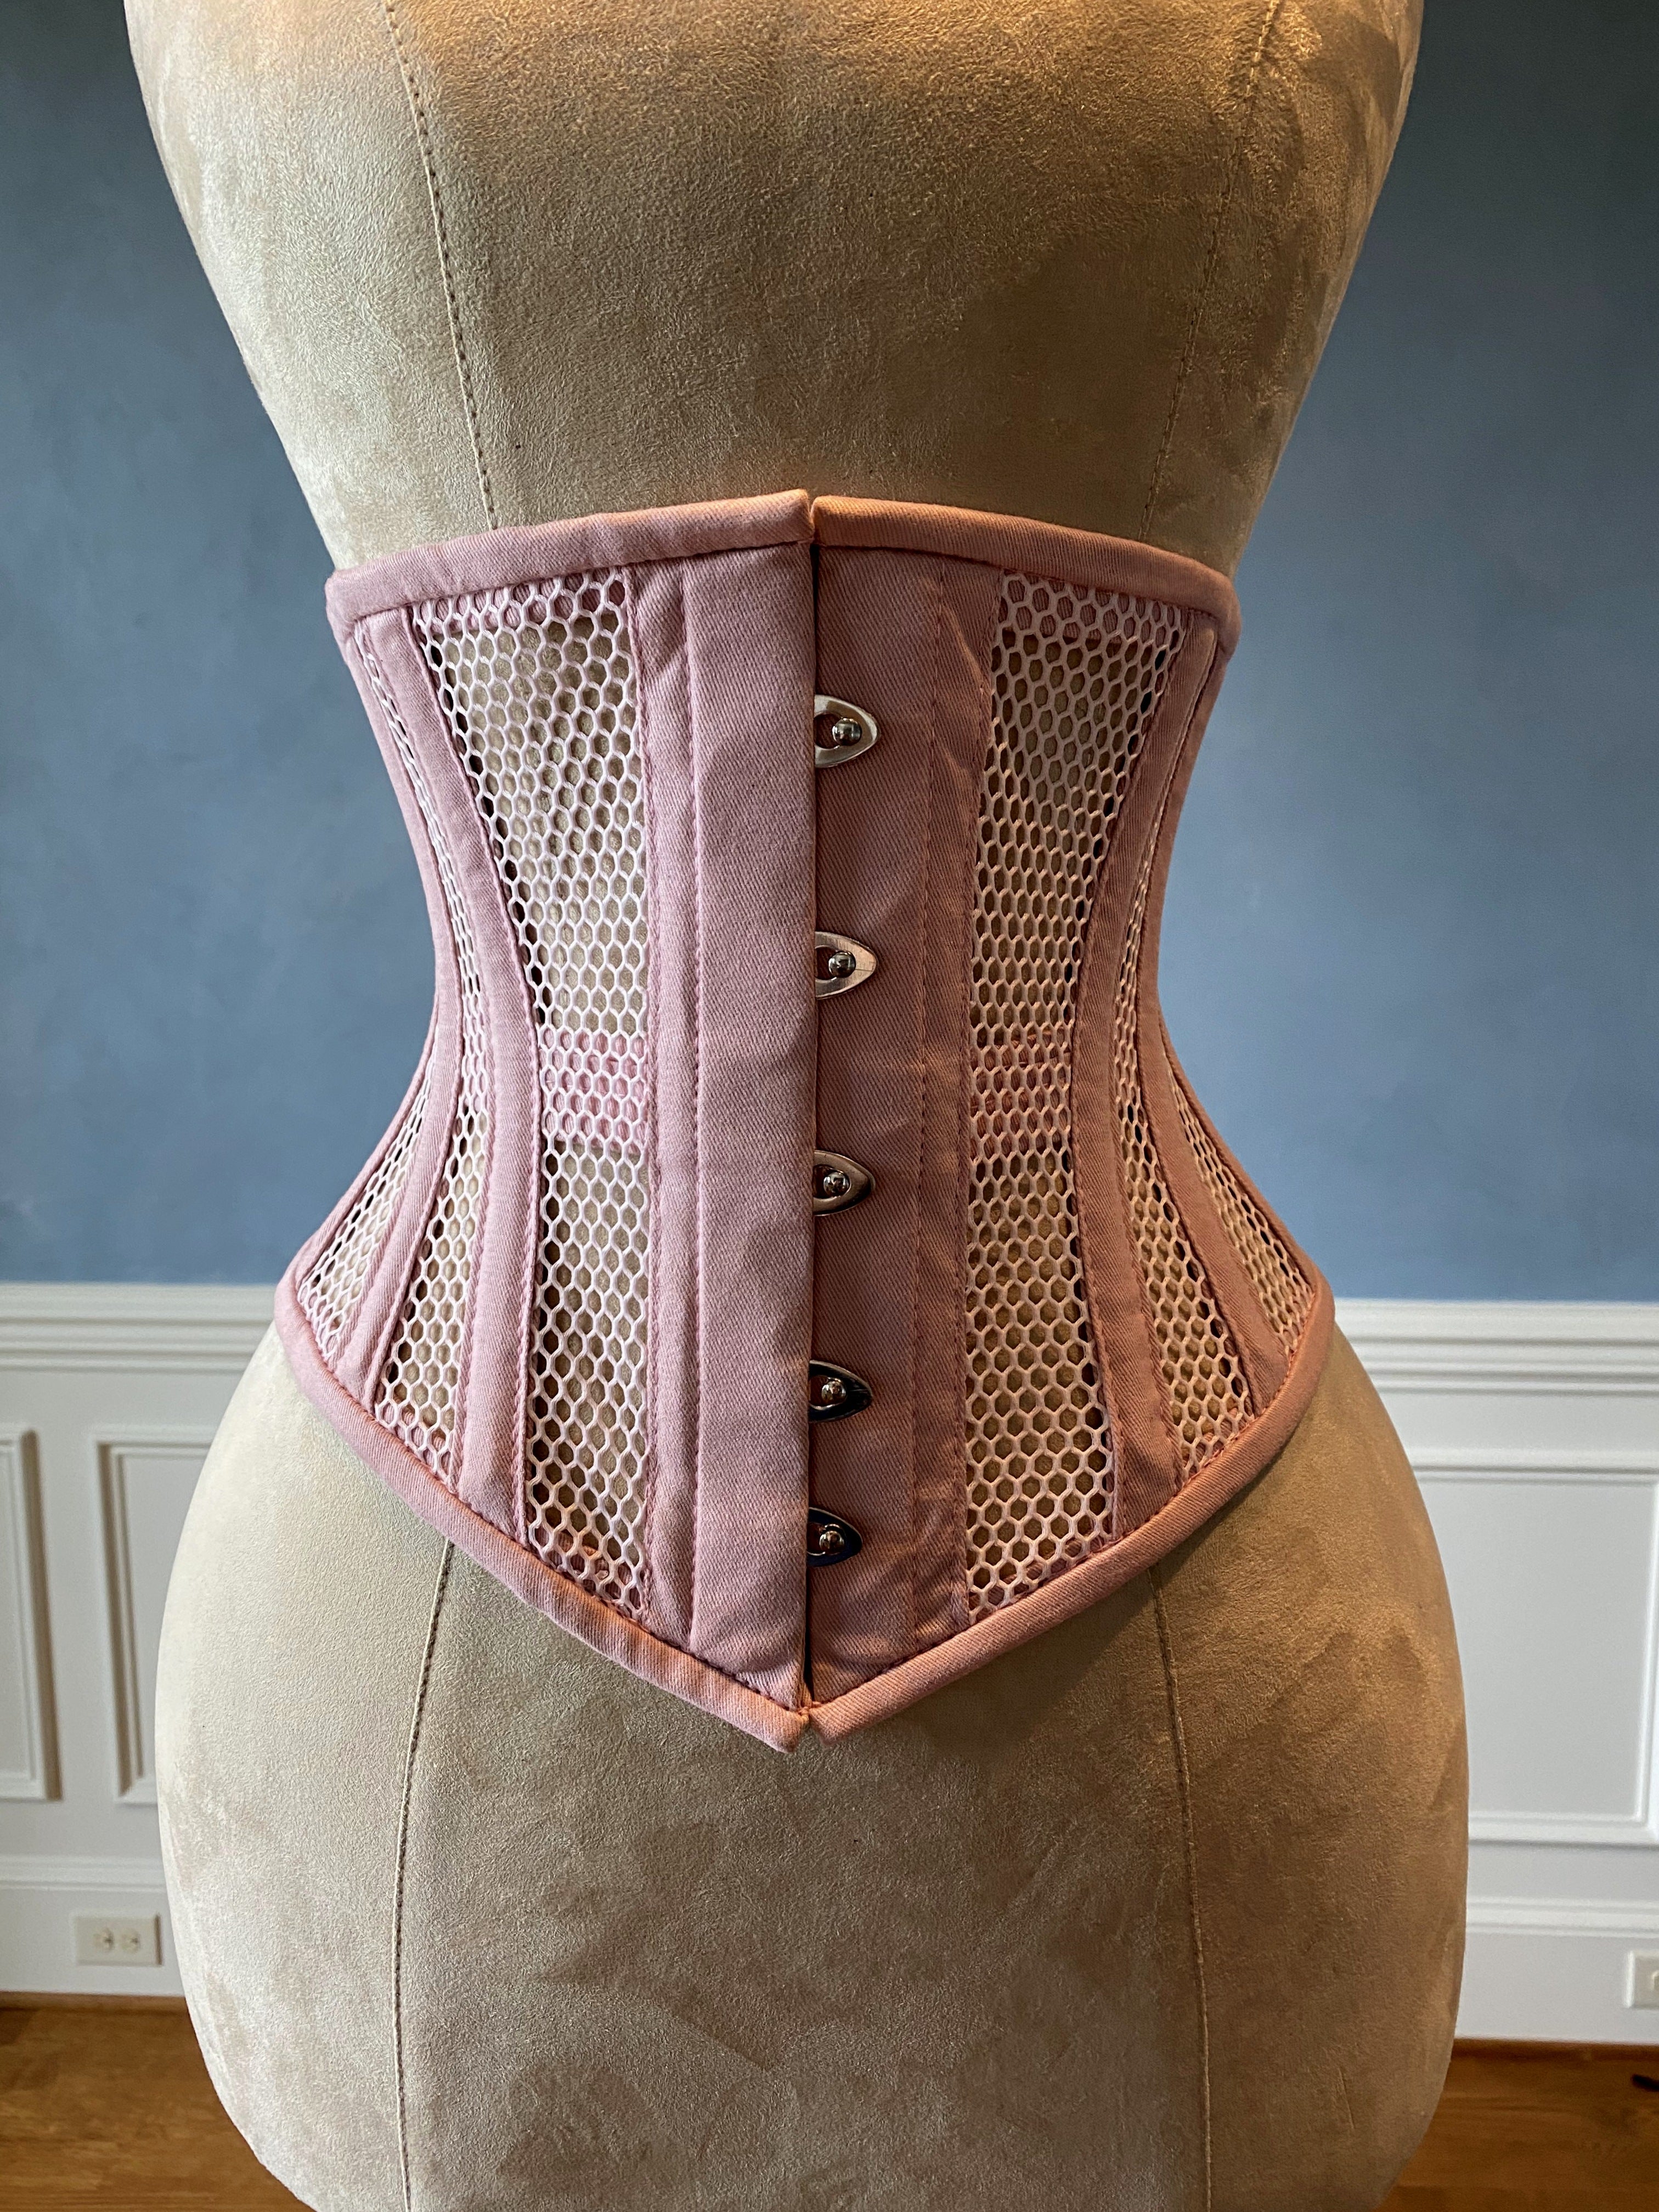 Authentic steel-boned underbust corsets – Corsettery Authentic Corsets USA